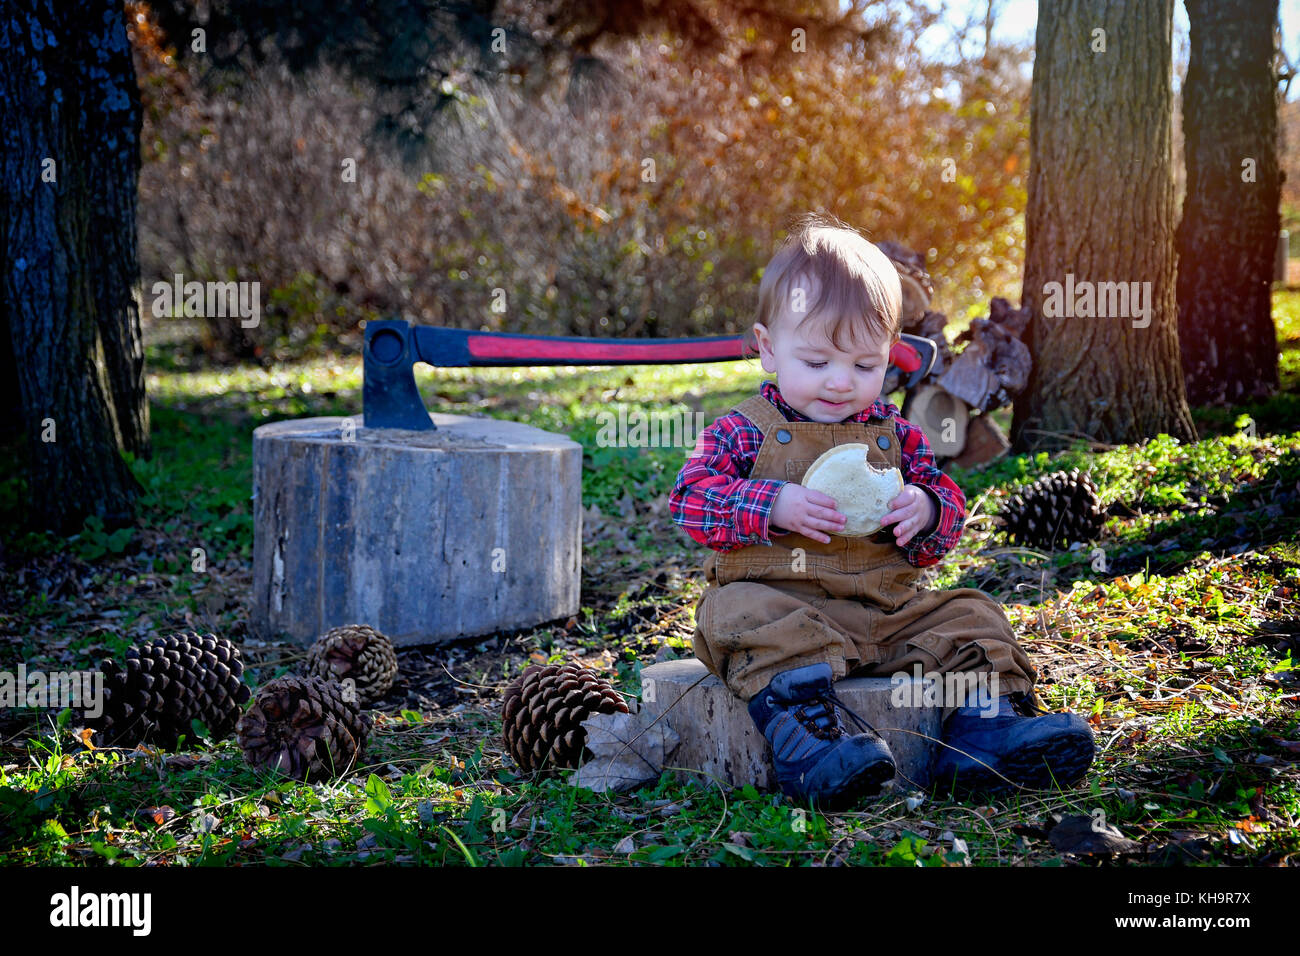 Baby boy lumberjack wearing boots and overalls sitting down eating a sandwich ax in the background large pinecones rural country setting Stock Photo